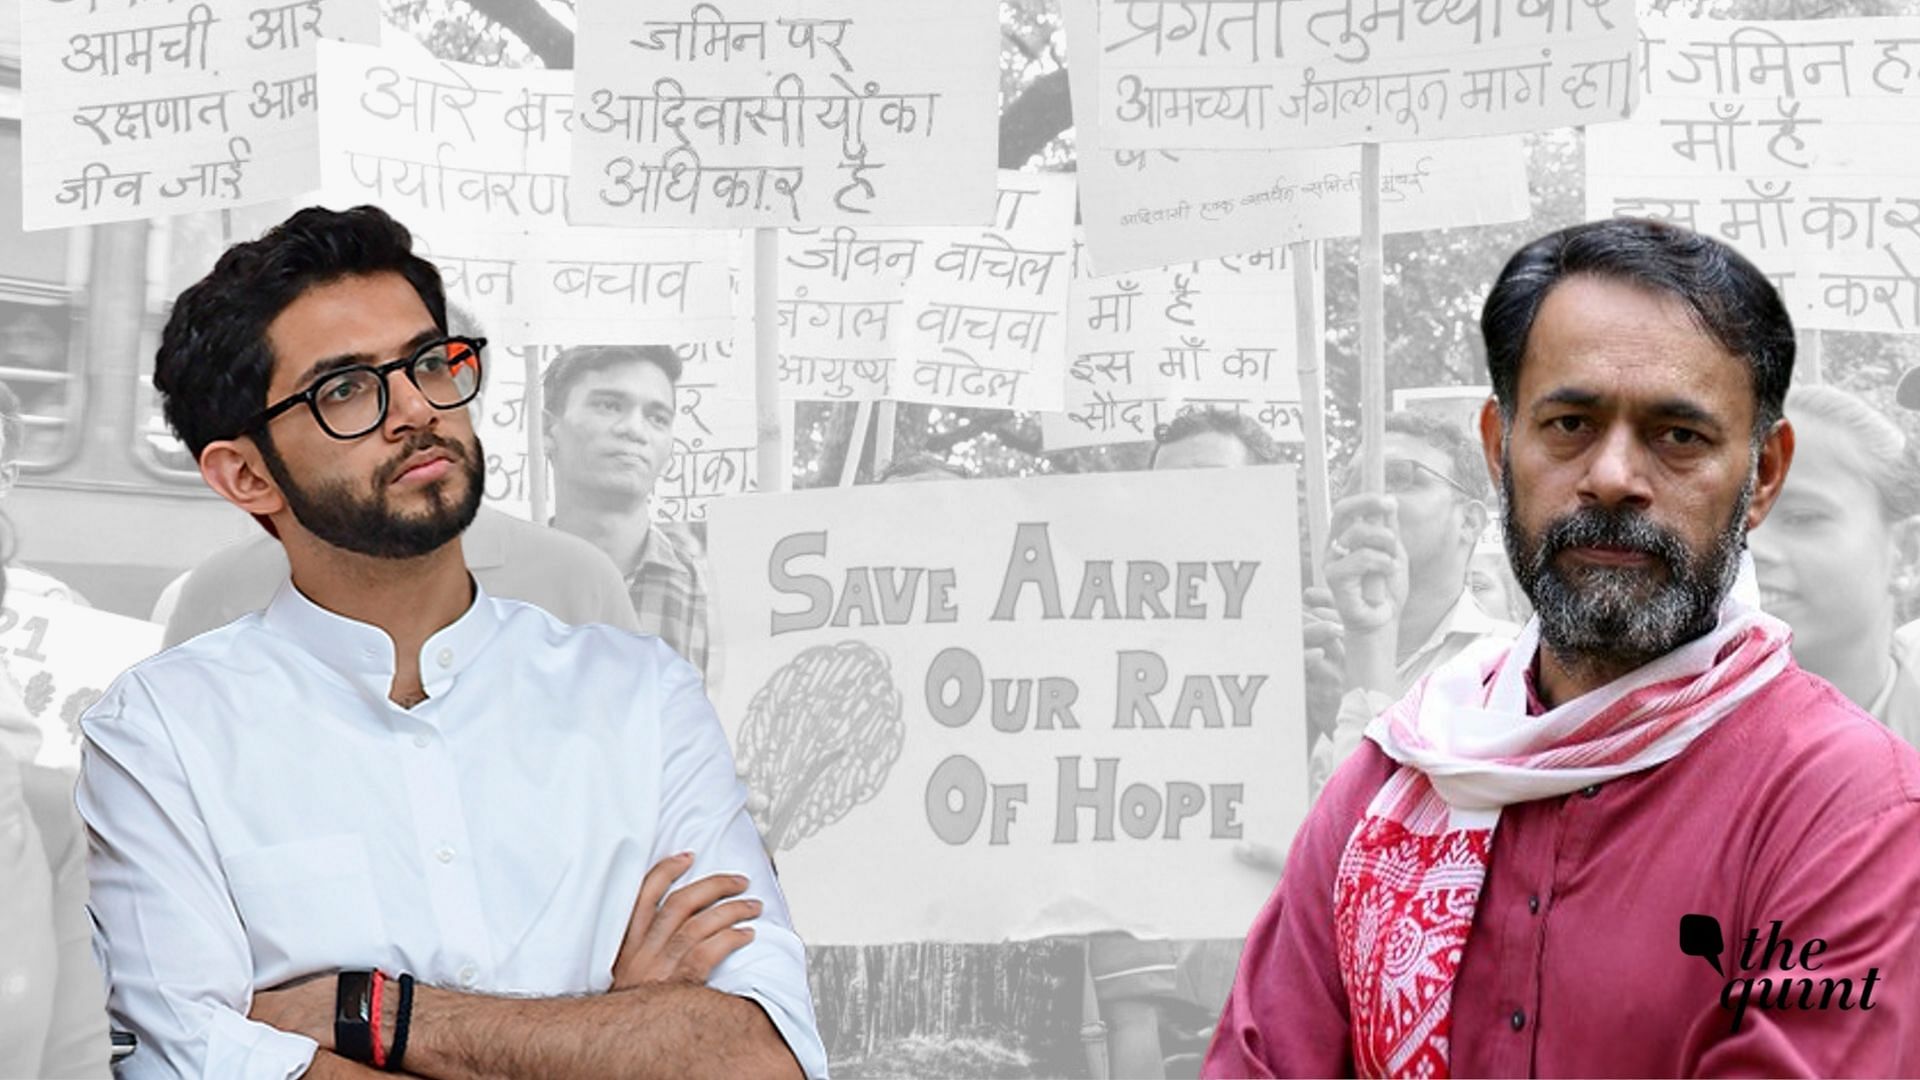 Several politicians and activists, including the BJP’s ruling ally and Shiv Sena leader Aaditya Thackeray on Friday, 4 October reacted to the Bombay HC verdict on cutting of trees at Mumbai’s Aarey colony.